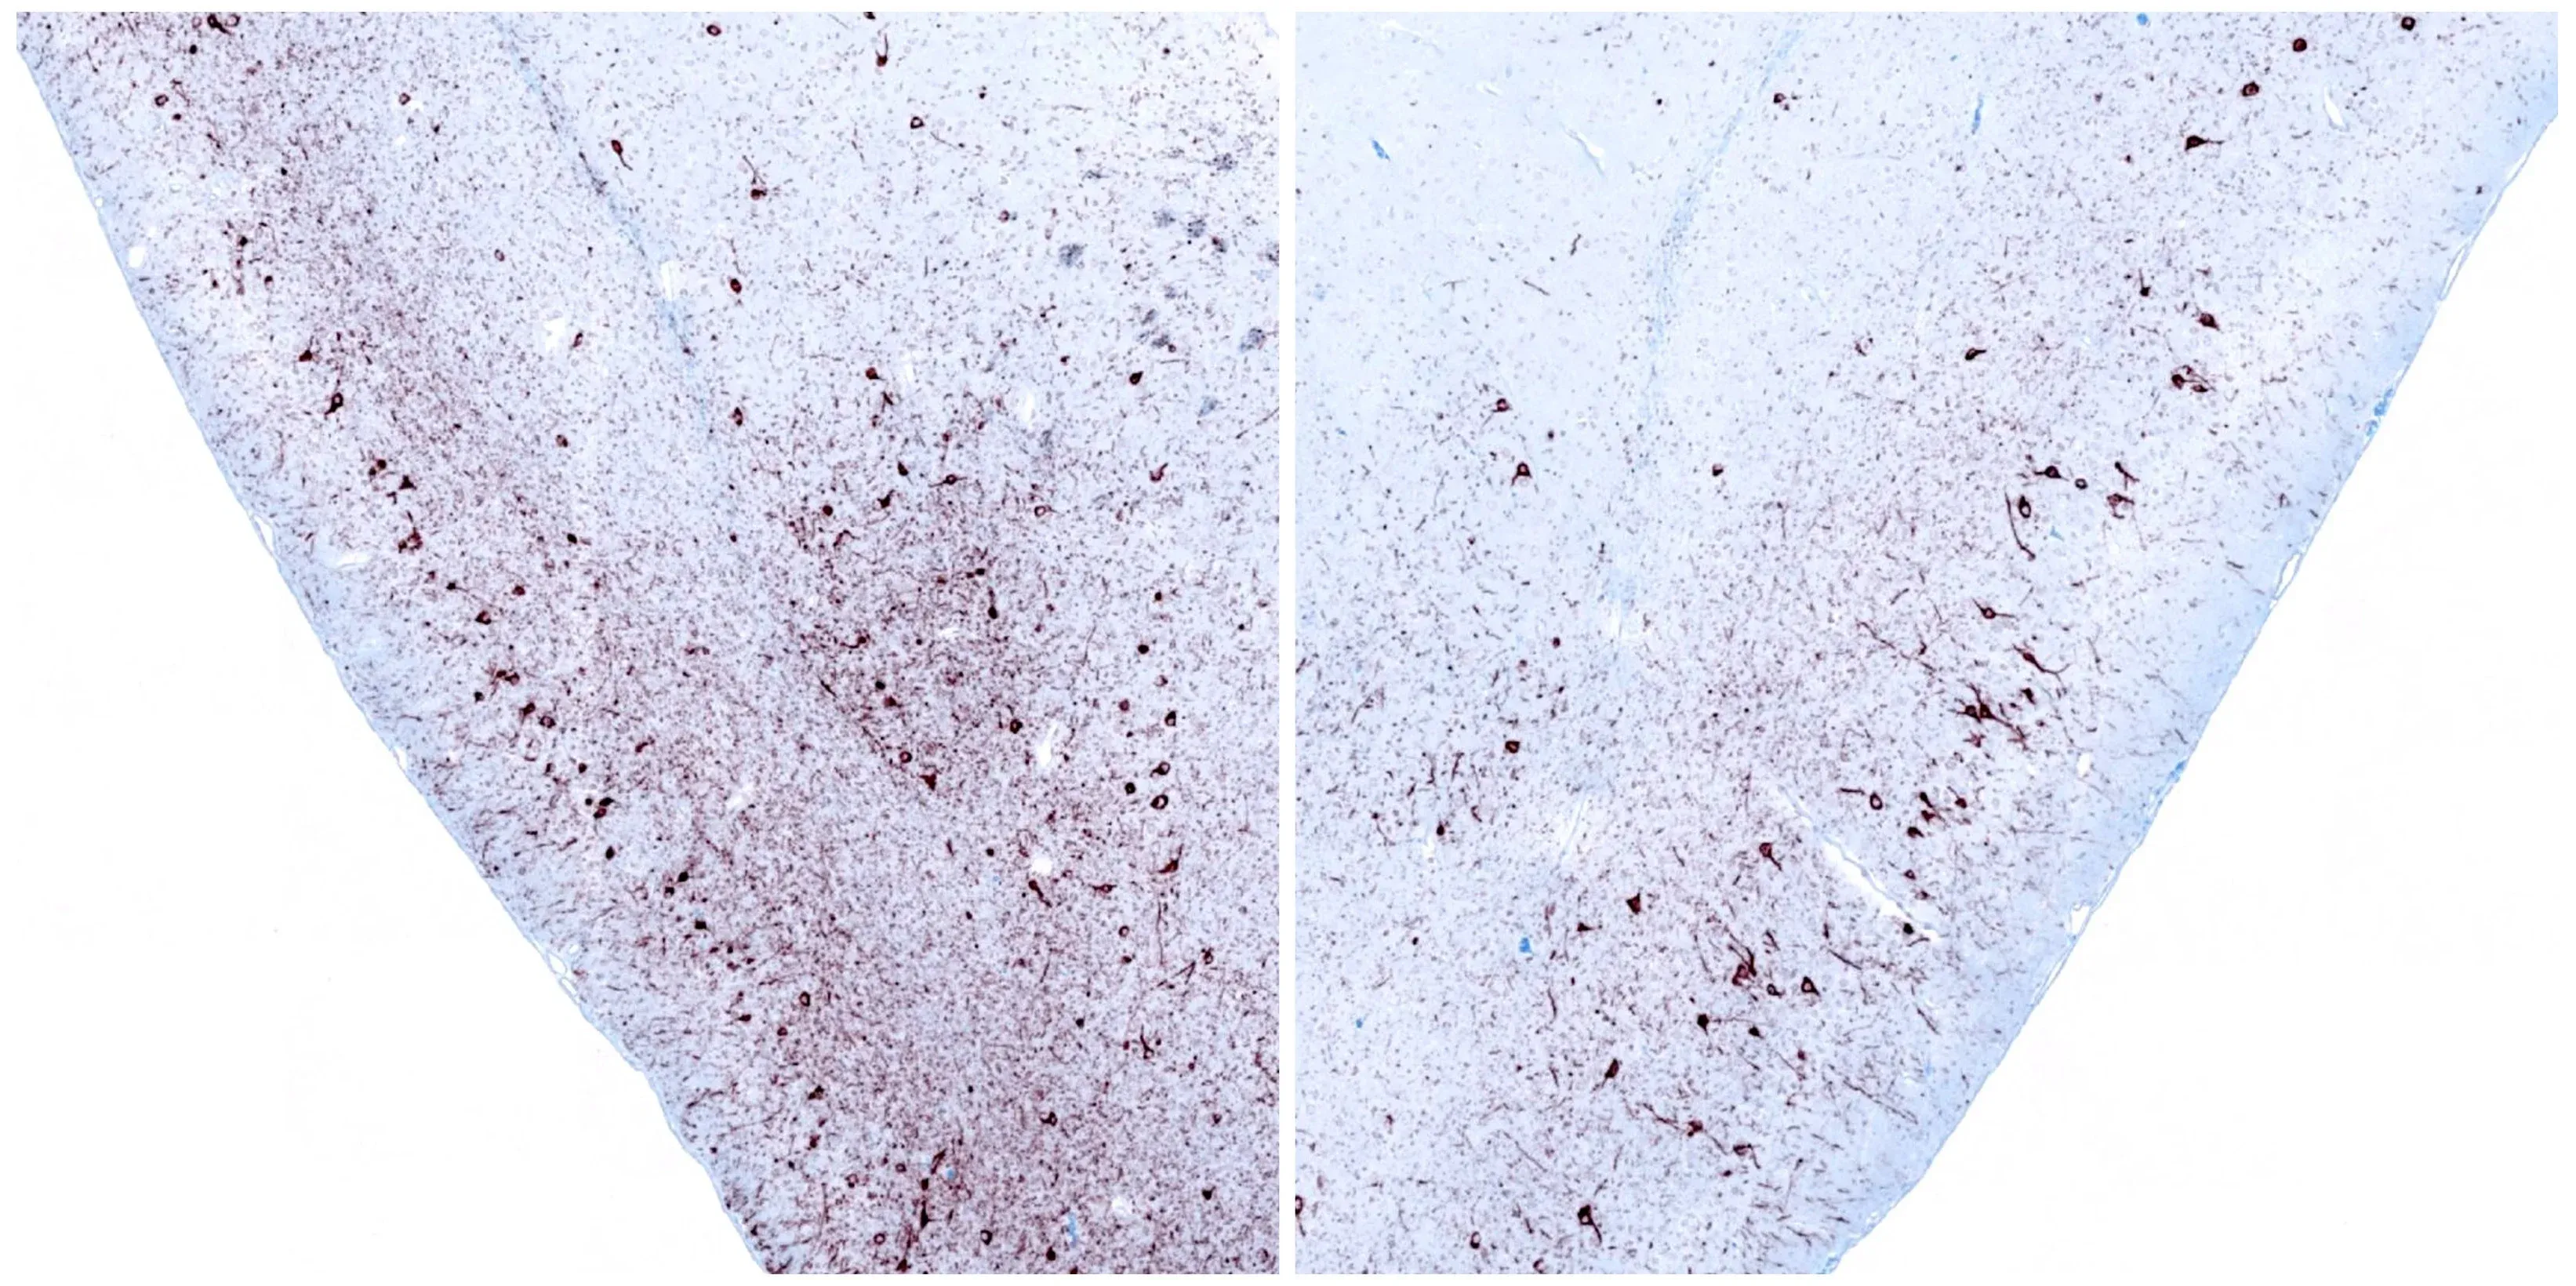 A pair of brain tissue sections processed with immunohistochemistry (IHC) to highlight phosphorylated alpha-synuclein, which is relevant in the context of Parkinson's Disease research